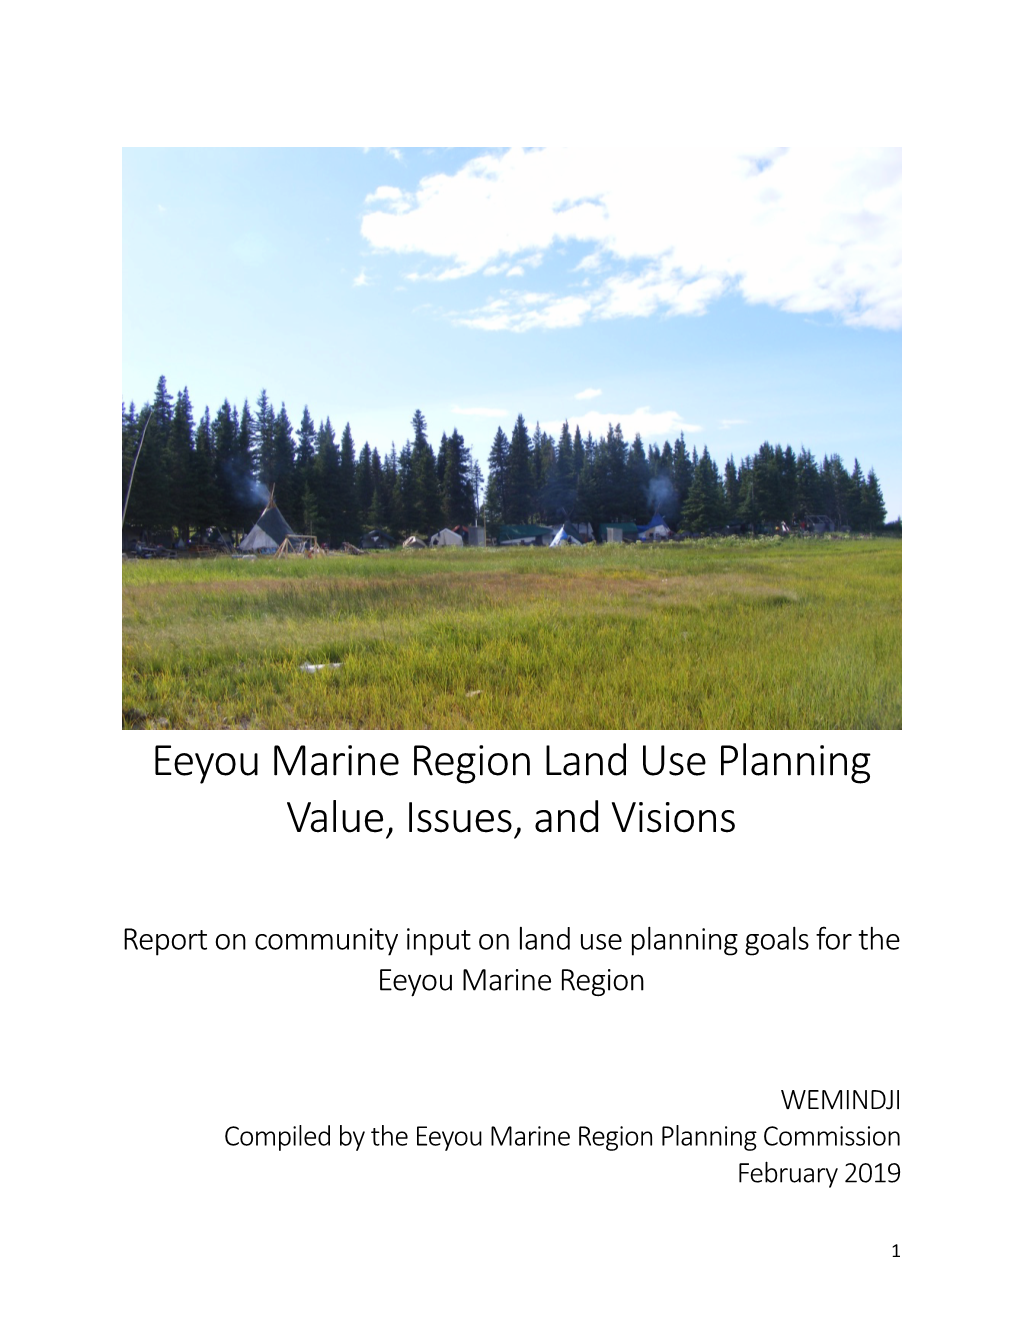 Eeyou Marine Region Land Use Planning Value, Issues, and Visions